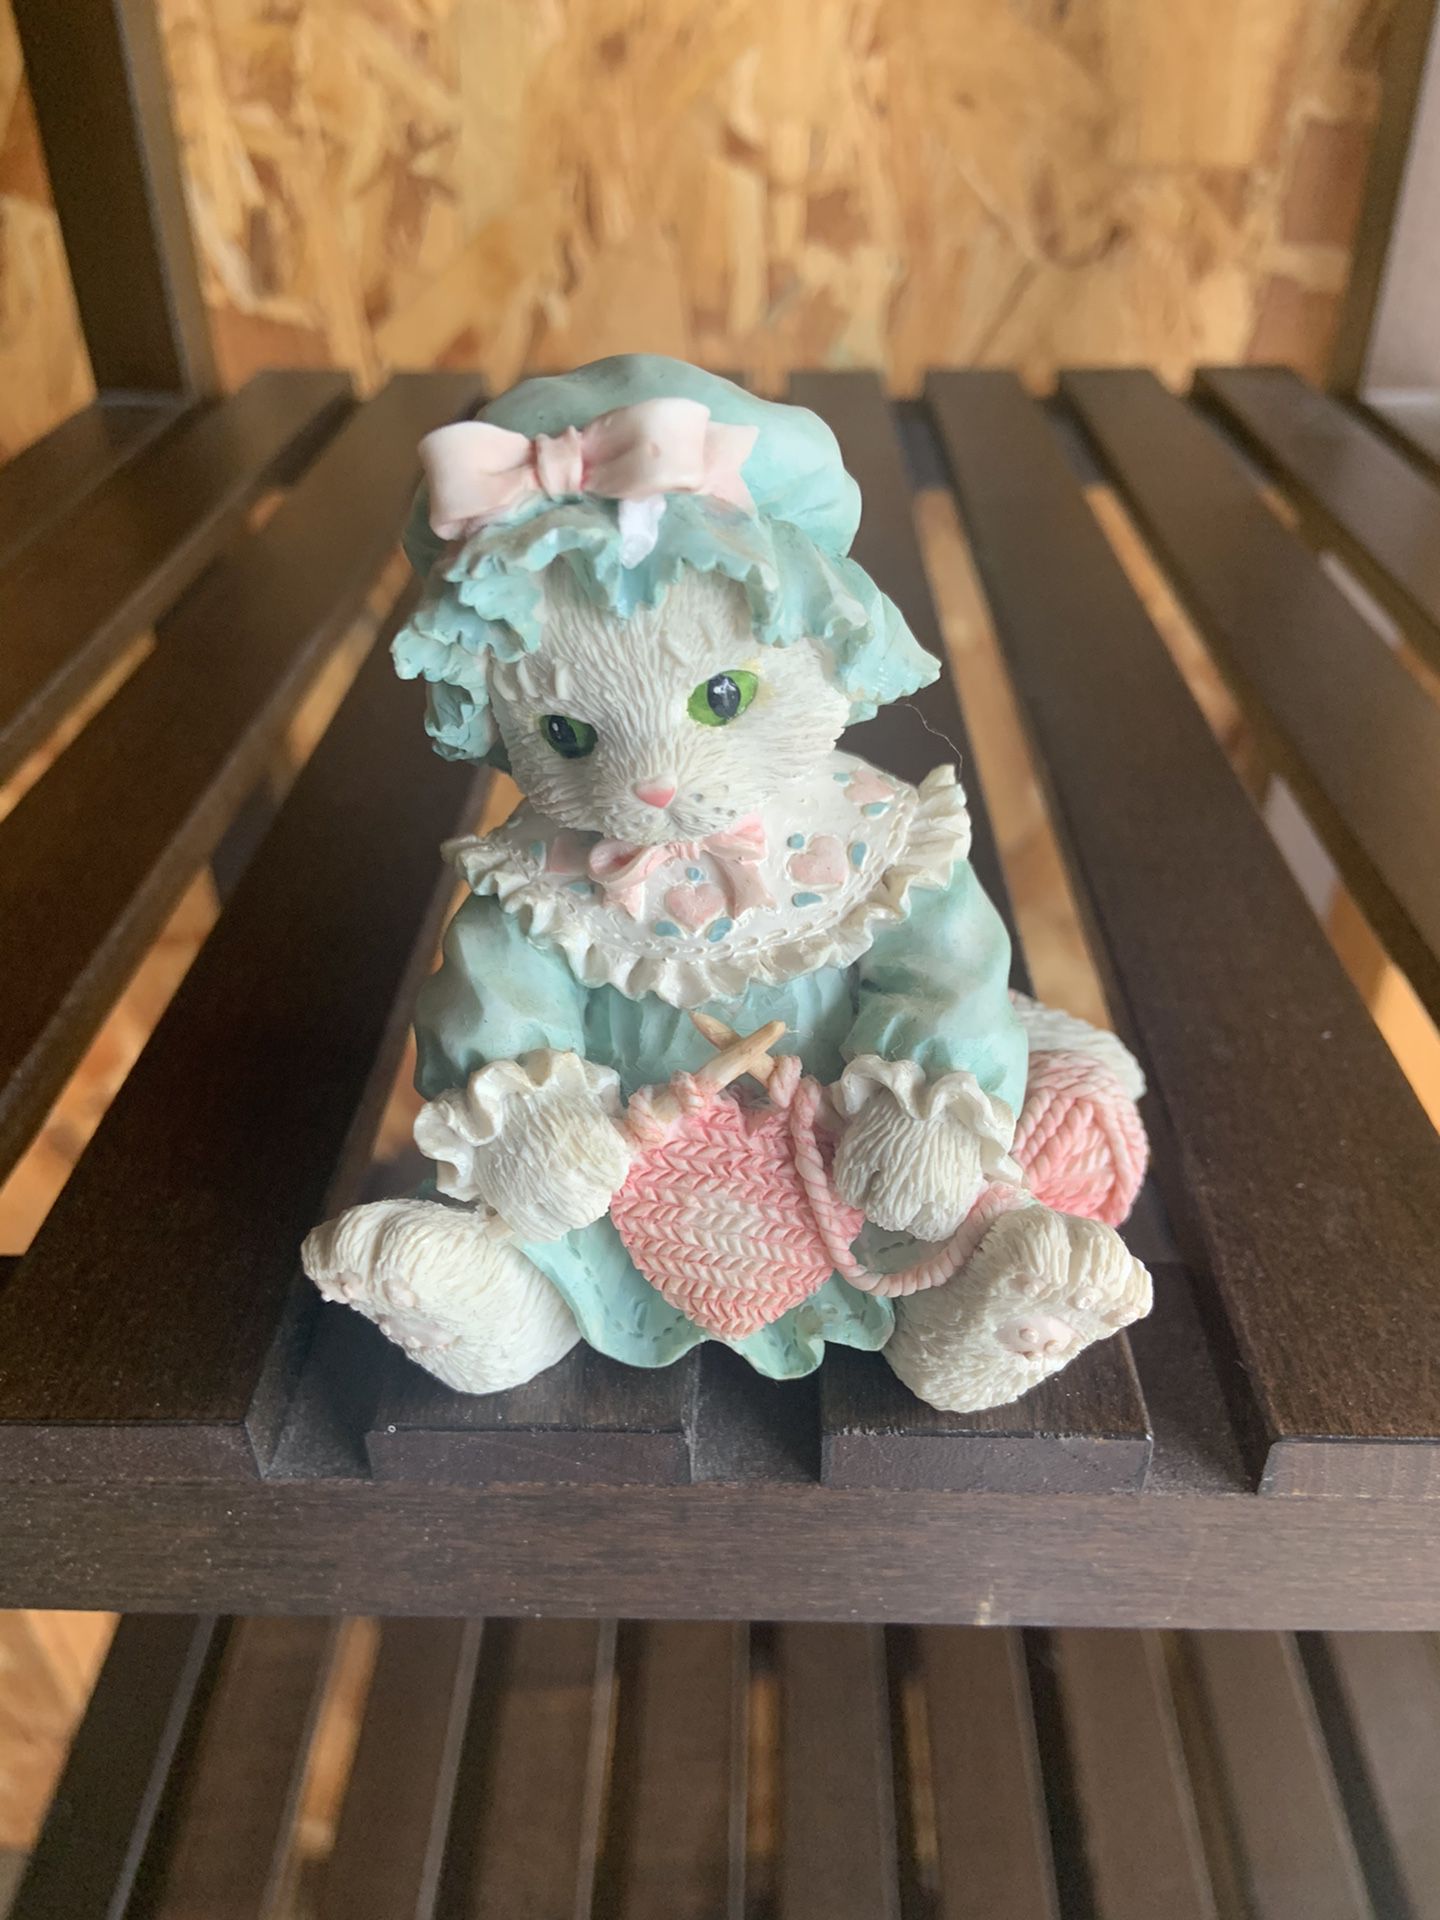 Calico Cat Collection  Will Sell In A Collection Or Individualy,  Shipping An I Durable Will Be Determined On How Many Purchased.  